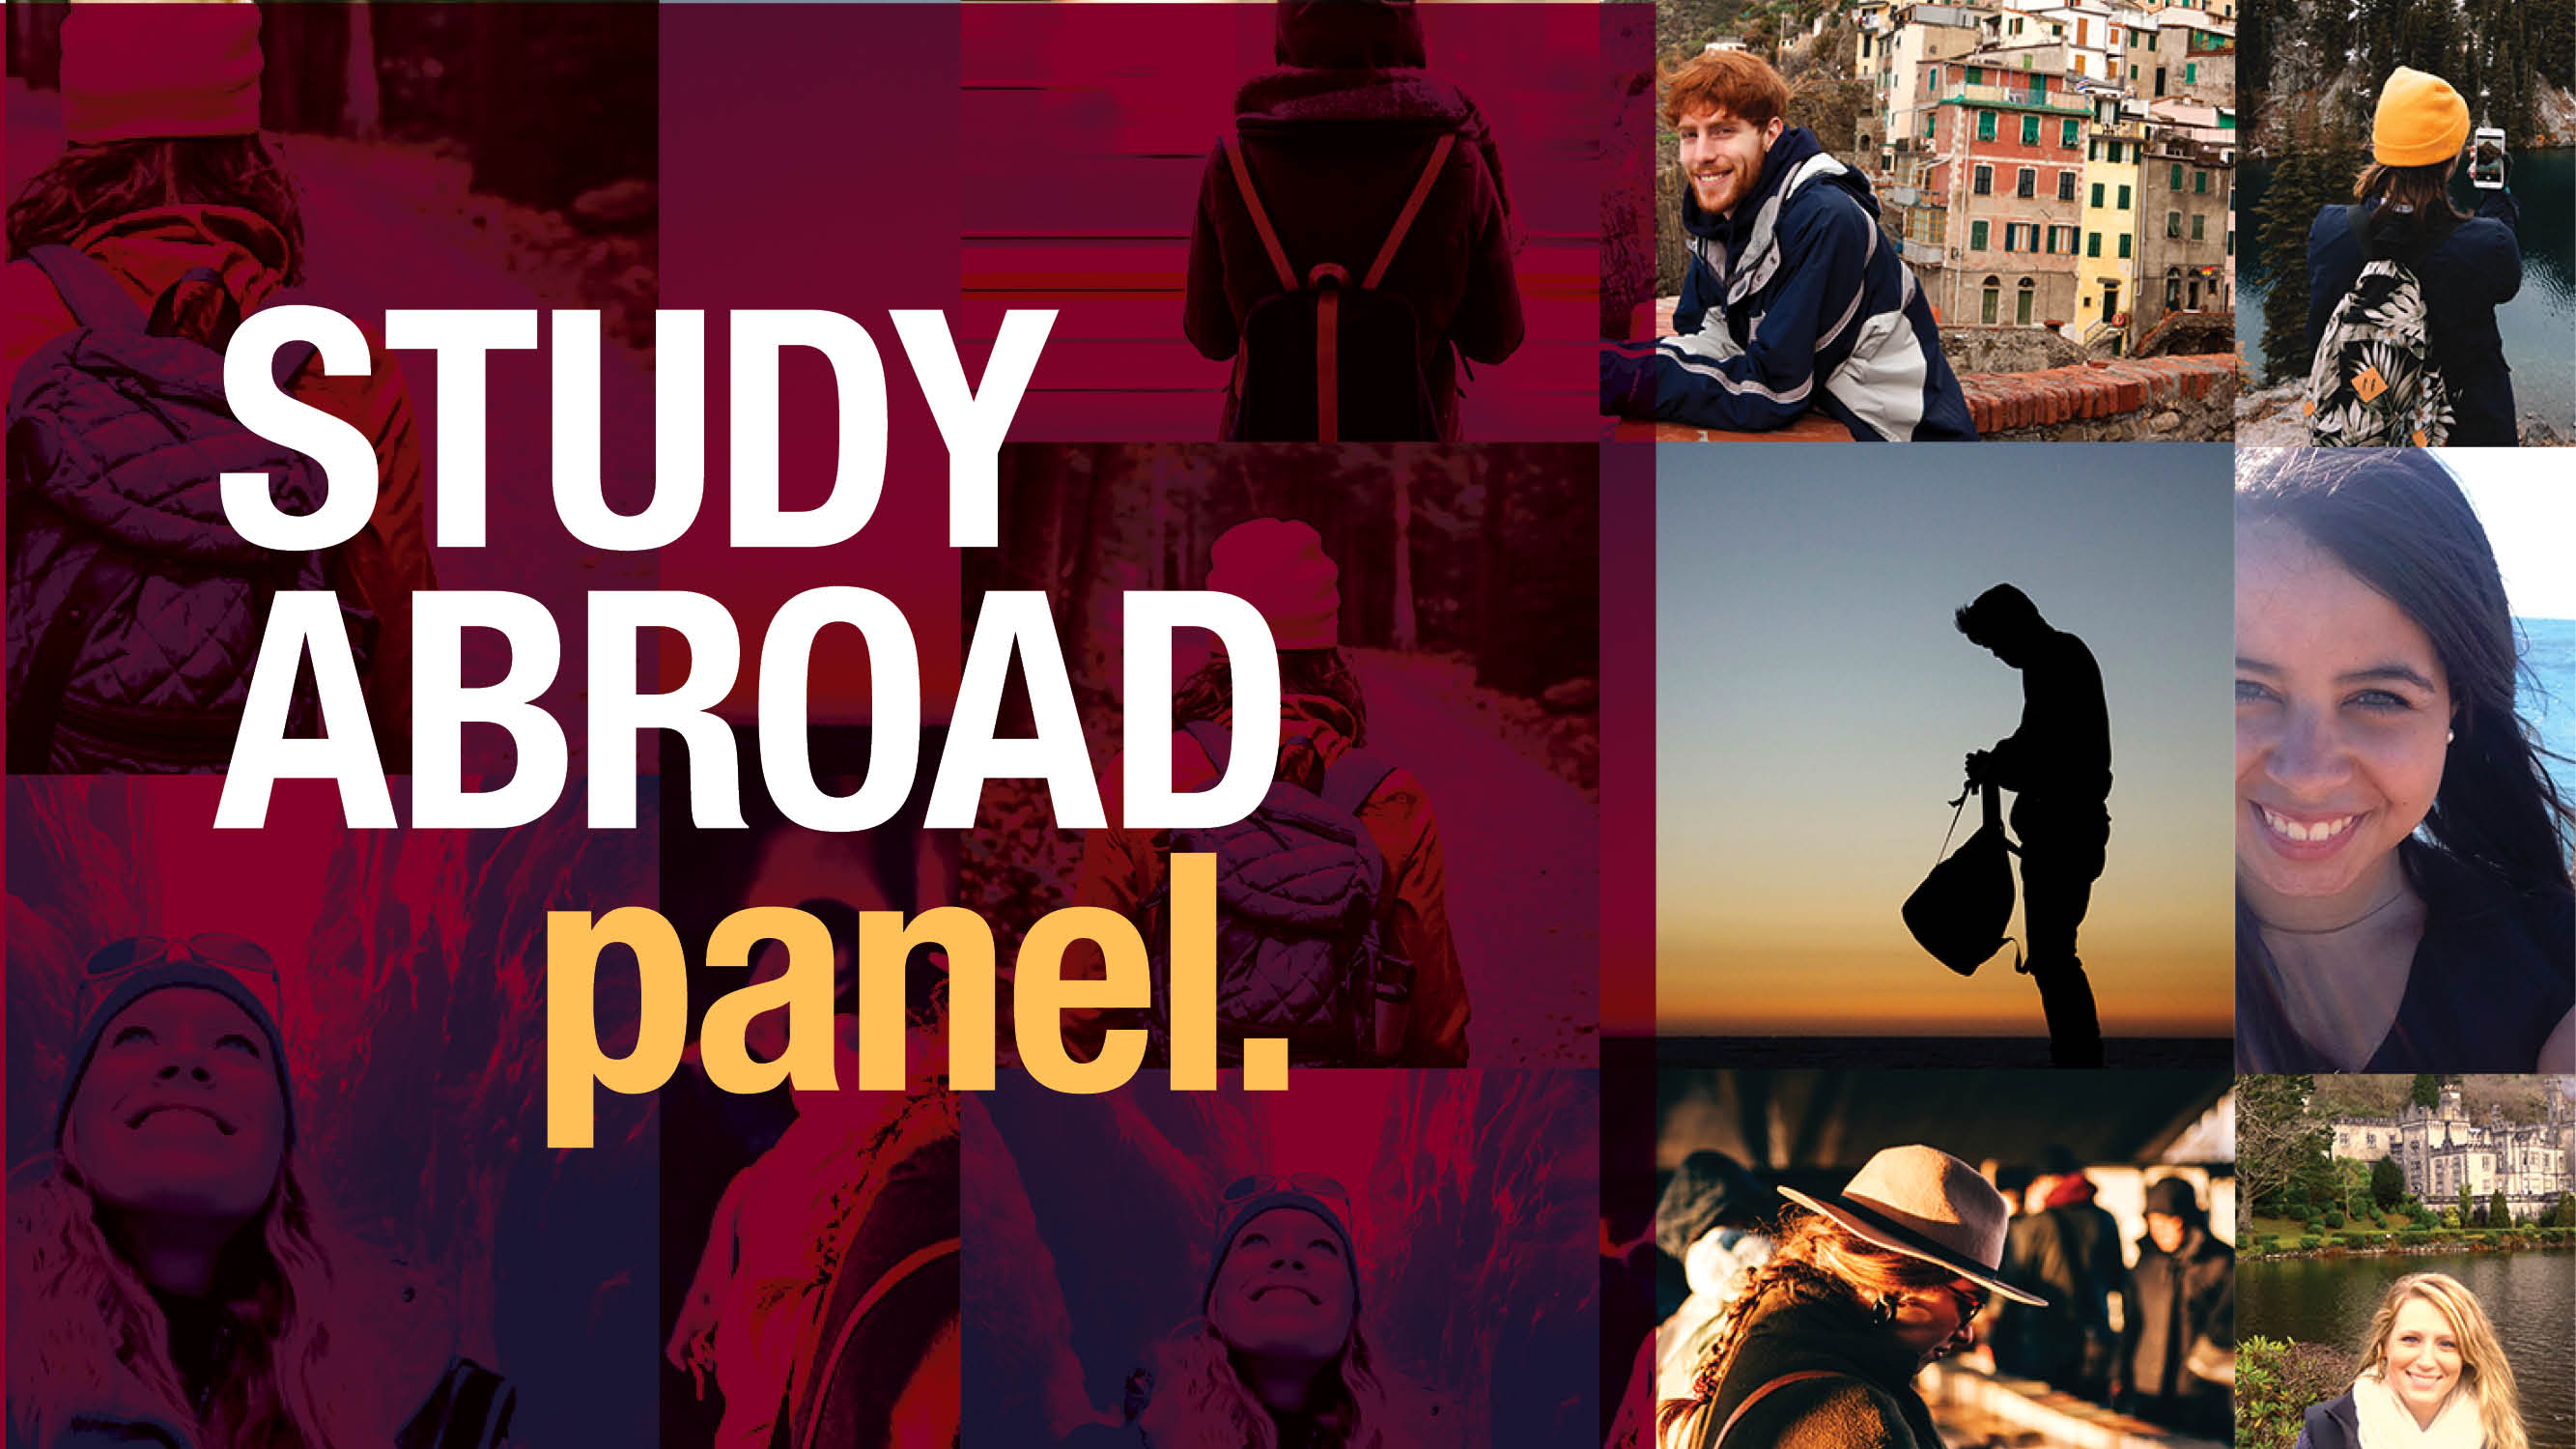 Study abroad panel poster